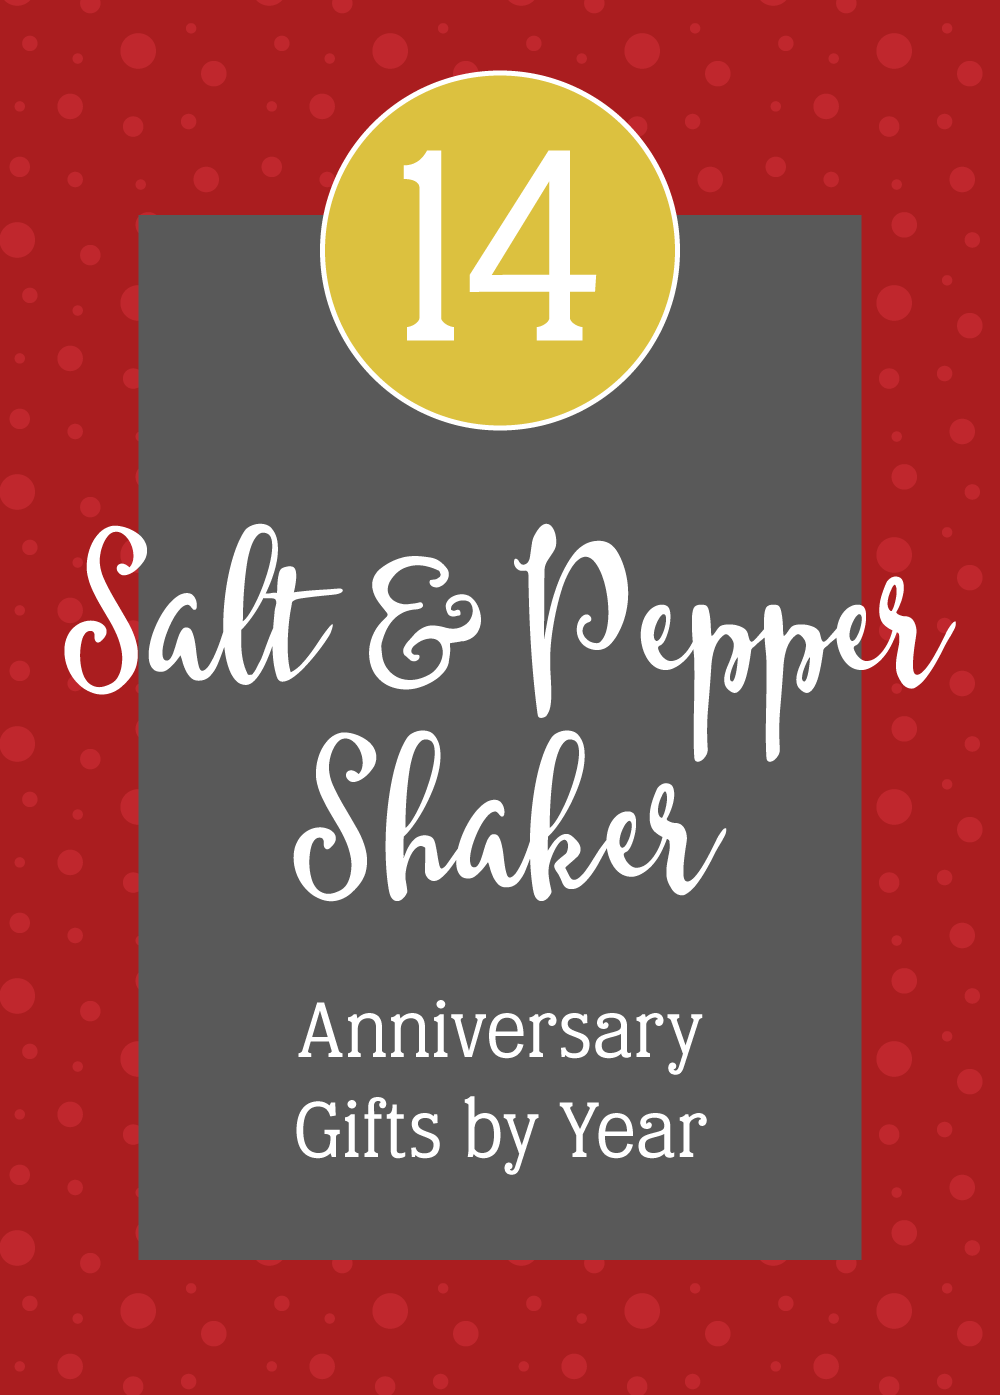 Featured Image for Fourteen Salt and Pepper Shaker Gifts by Year